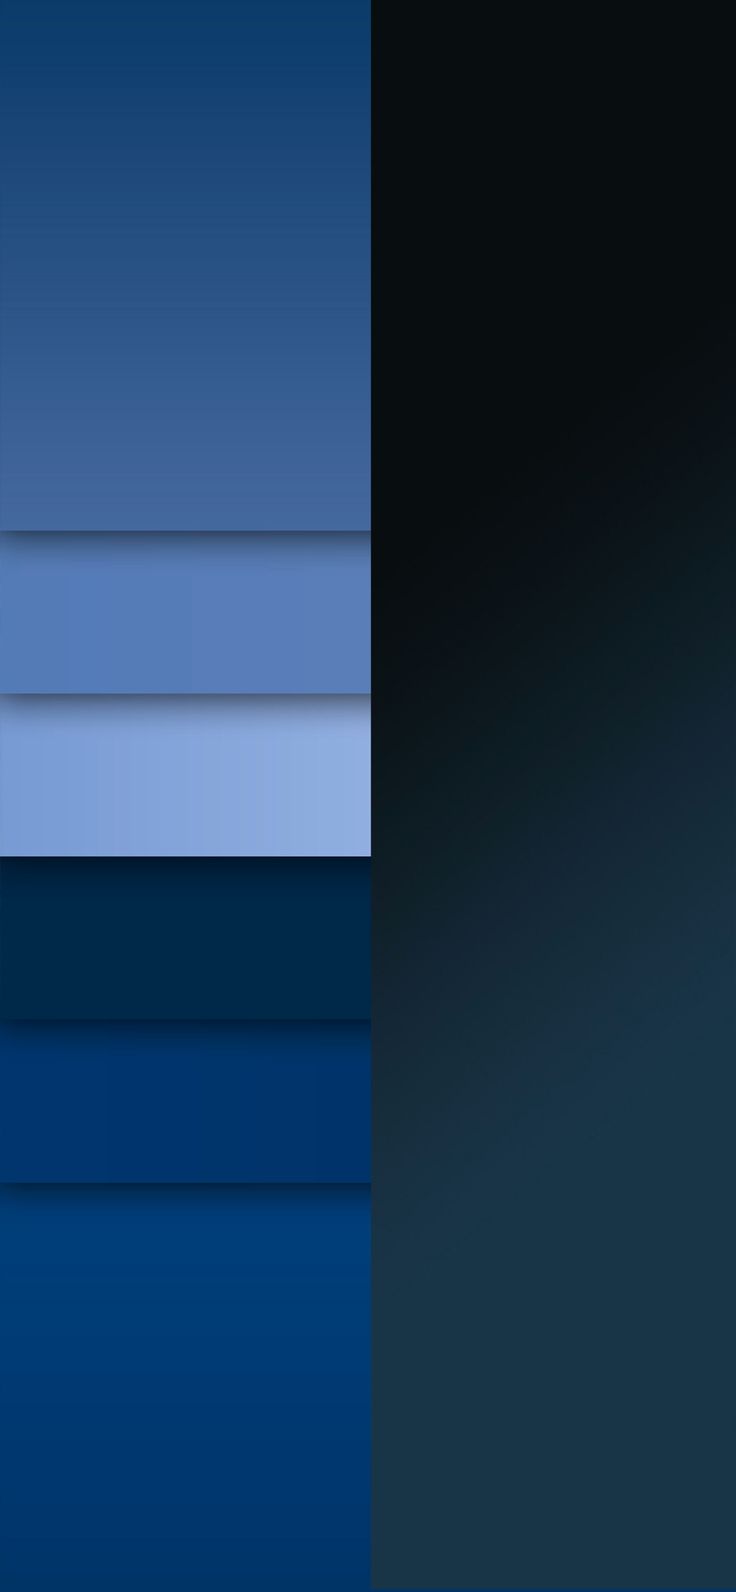 Pacific Blue. STRIPES DUAL Central. Color wallpaper iphone, Oneplus wallpaper, Apple wallpaper